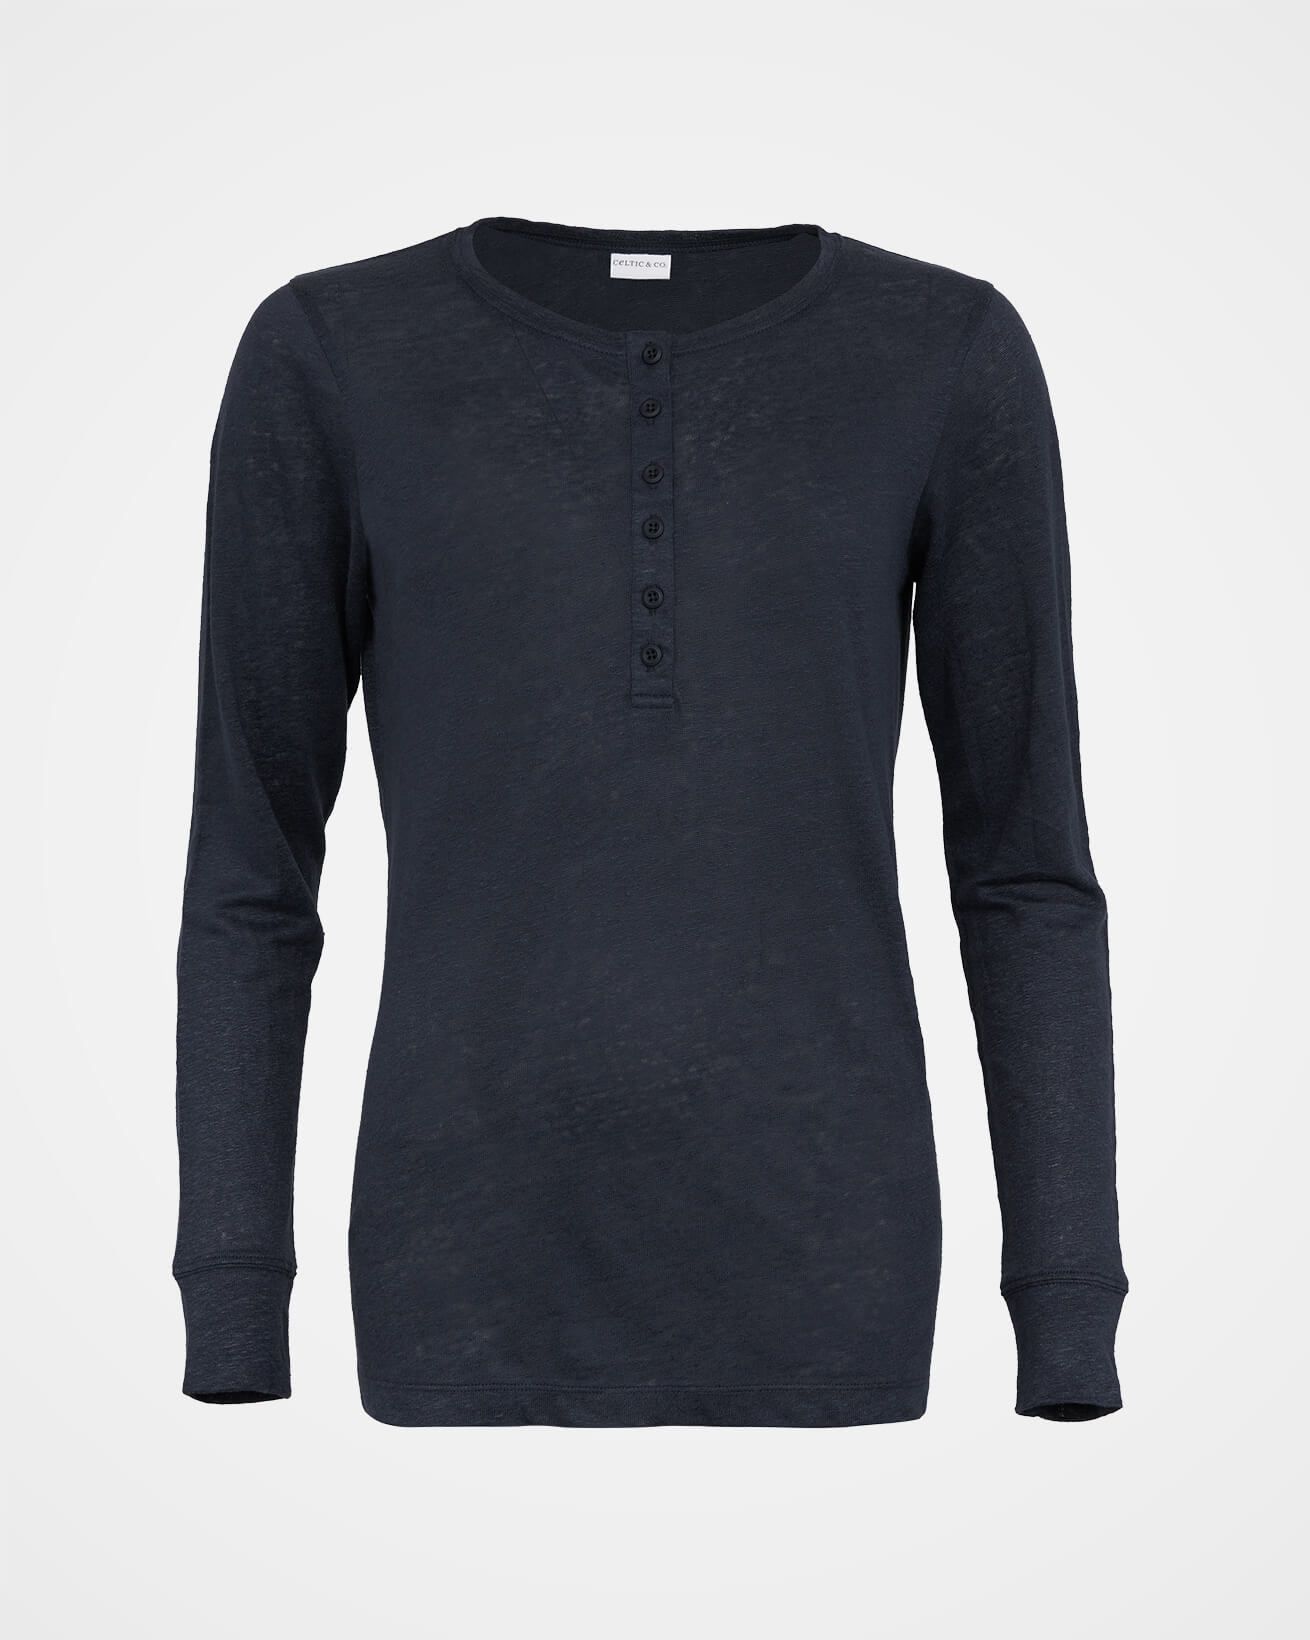 so i just ordered this hollister henley from another site. it's